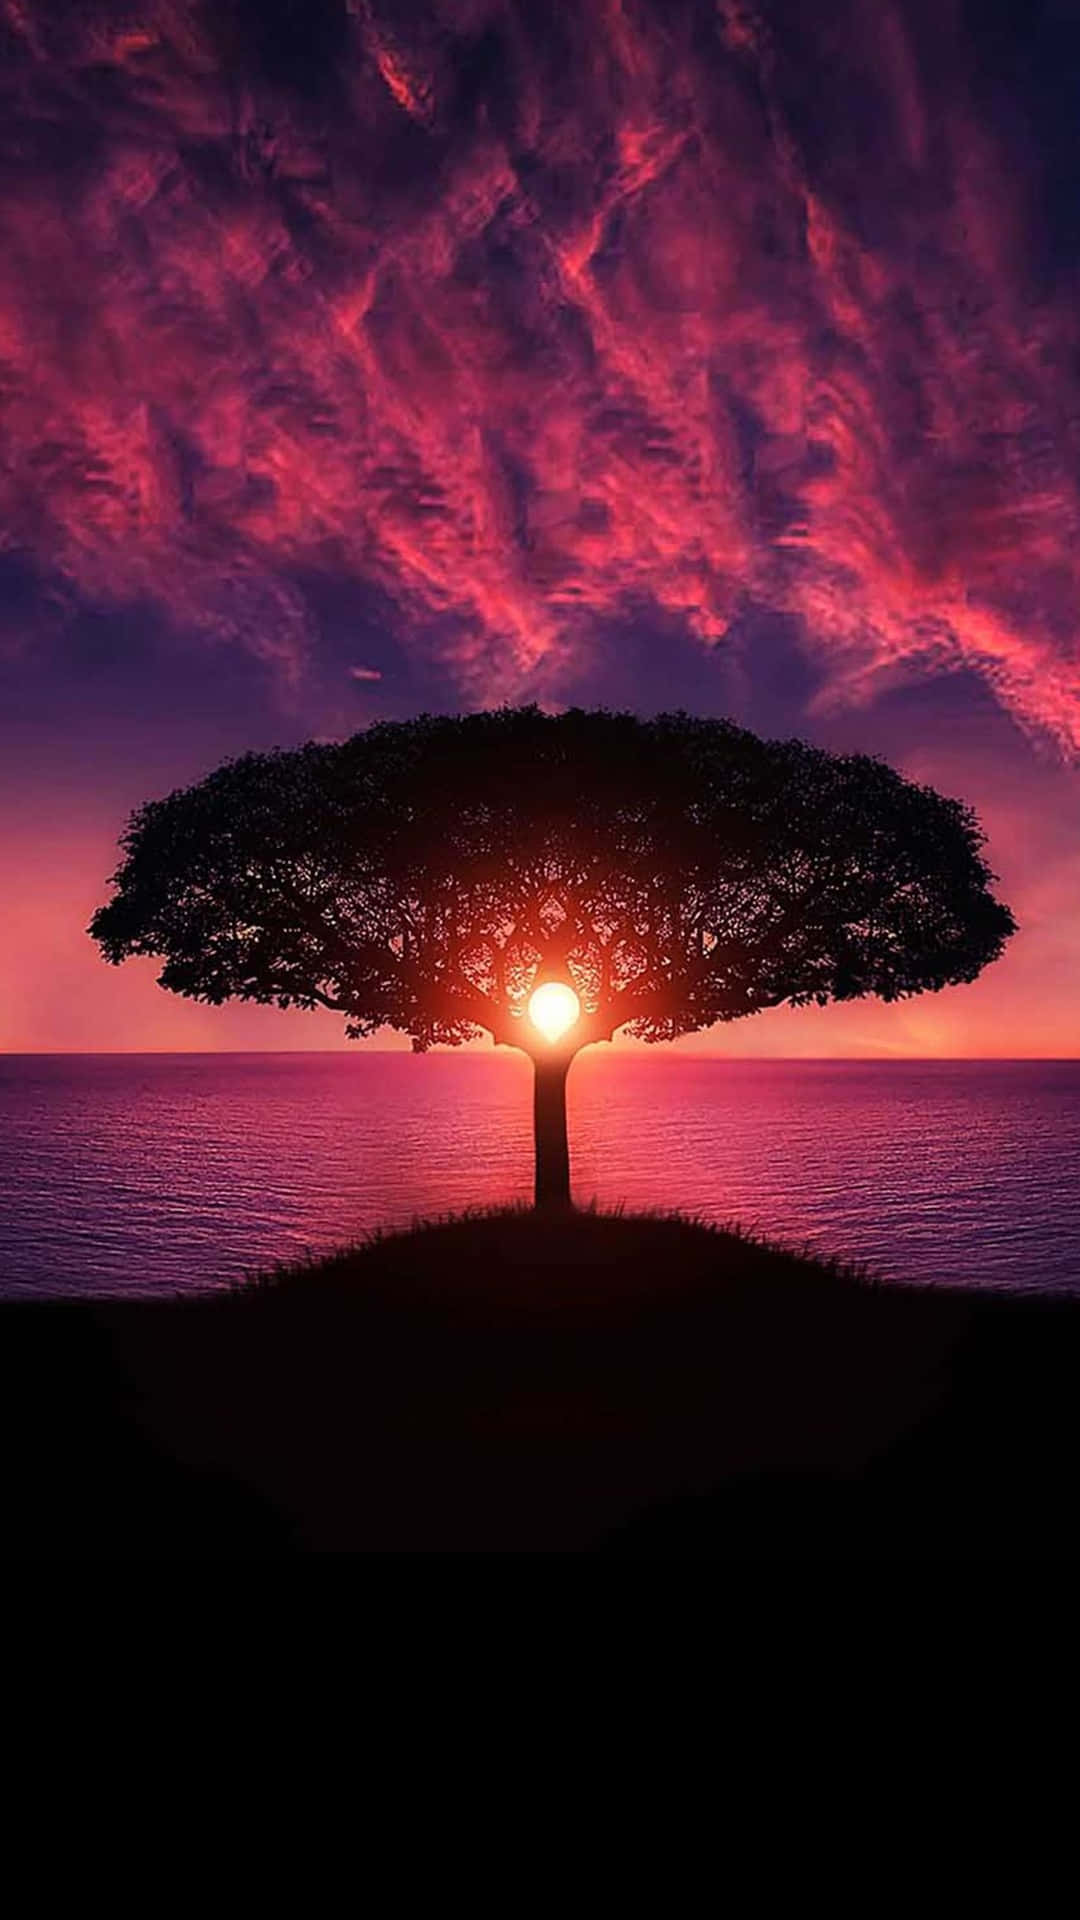 Tree Silhouette In Sunset Sky Colorful 4k Phone Wallpaper